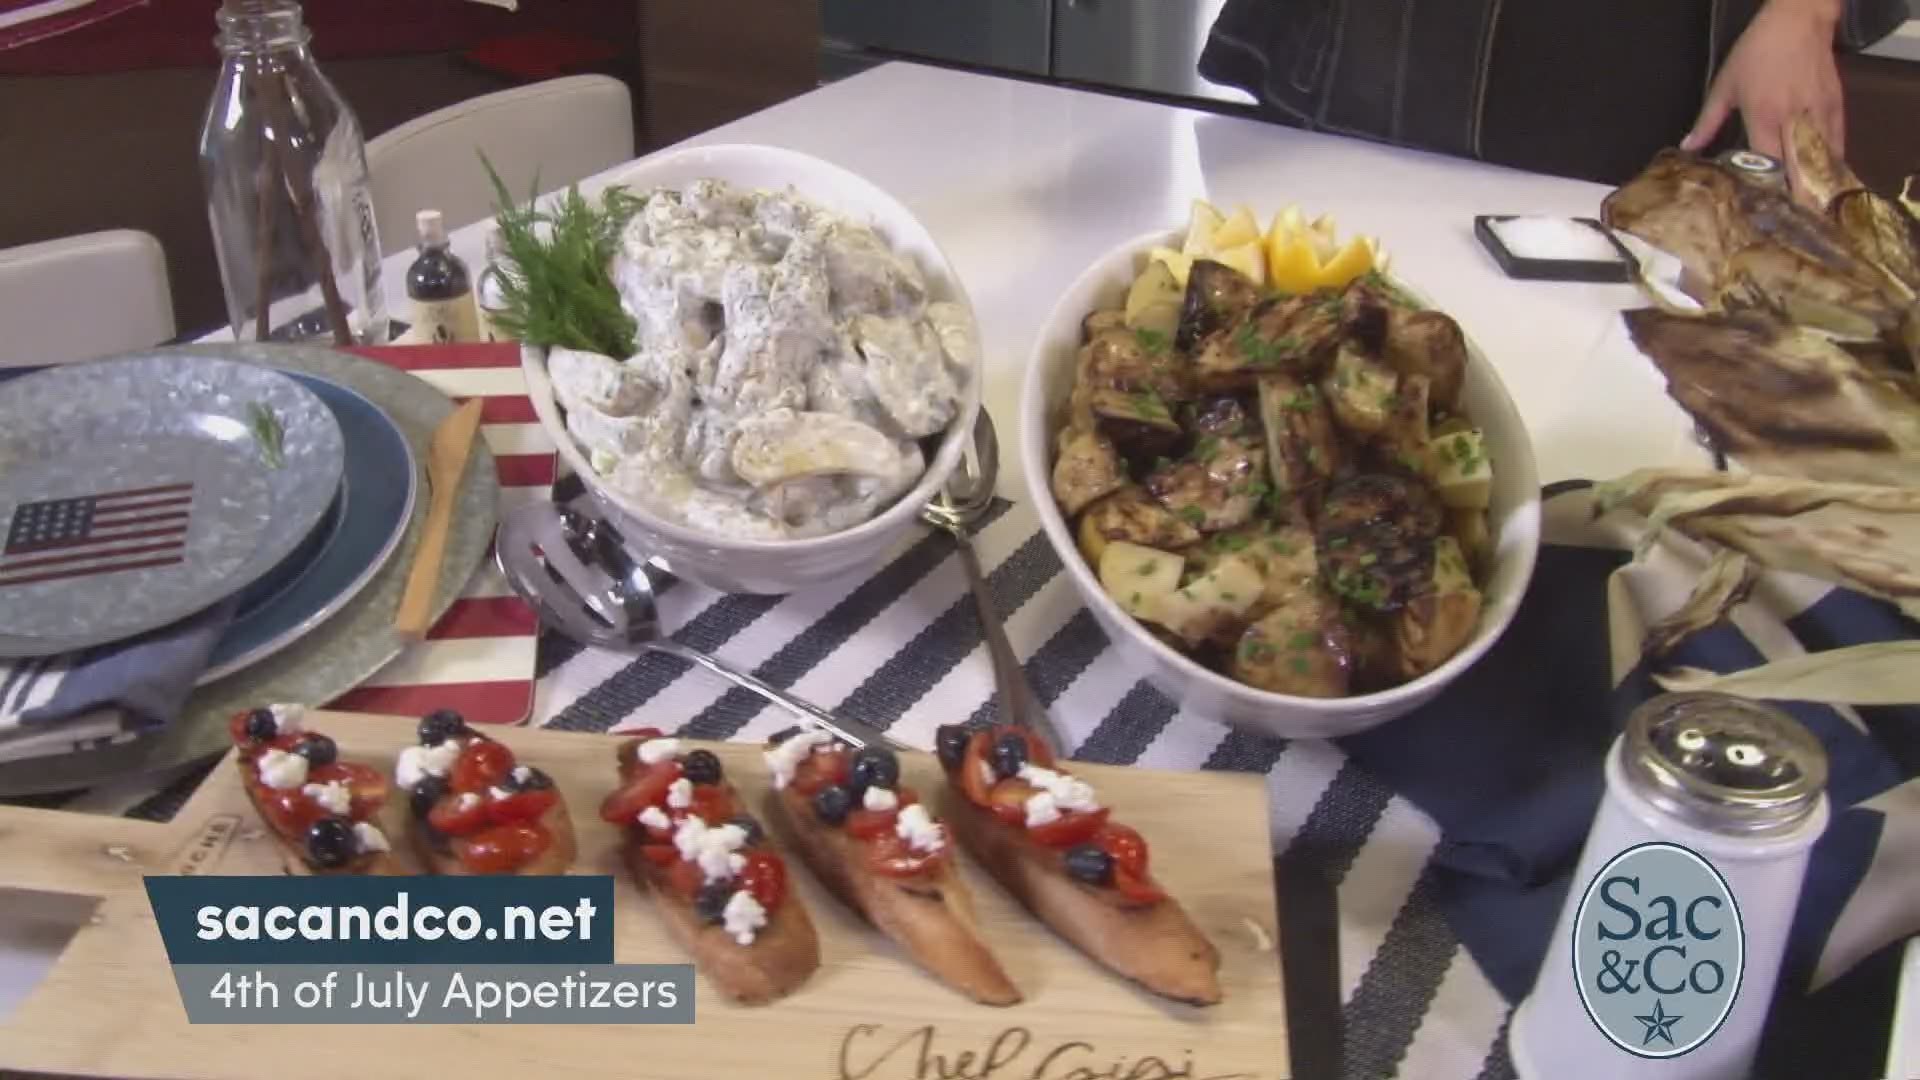 Chef Gigi Gaggero is making some delicious, nutrient-dense meals that are a great side for your fourth of July plans!